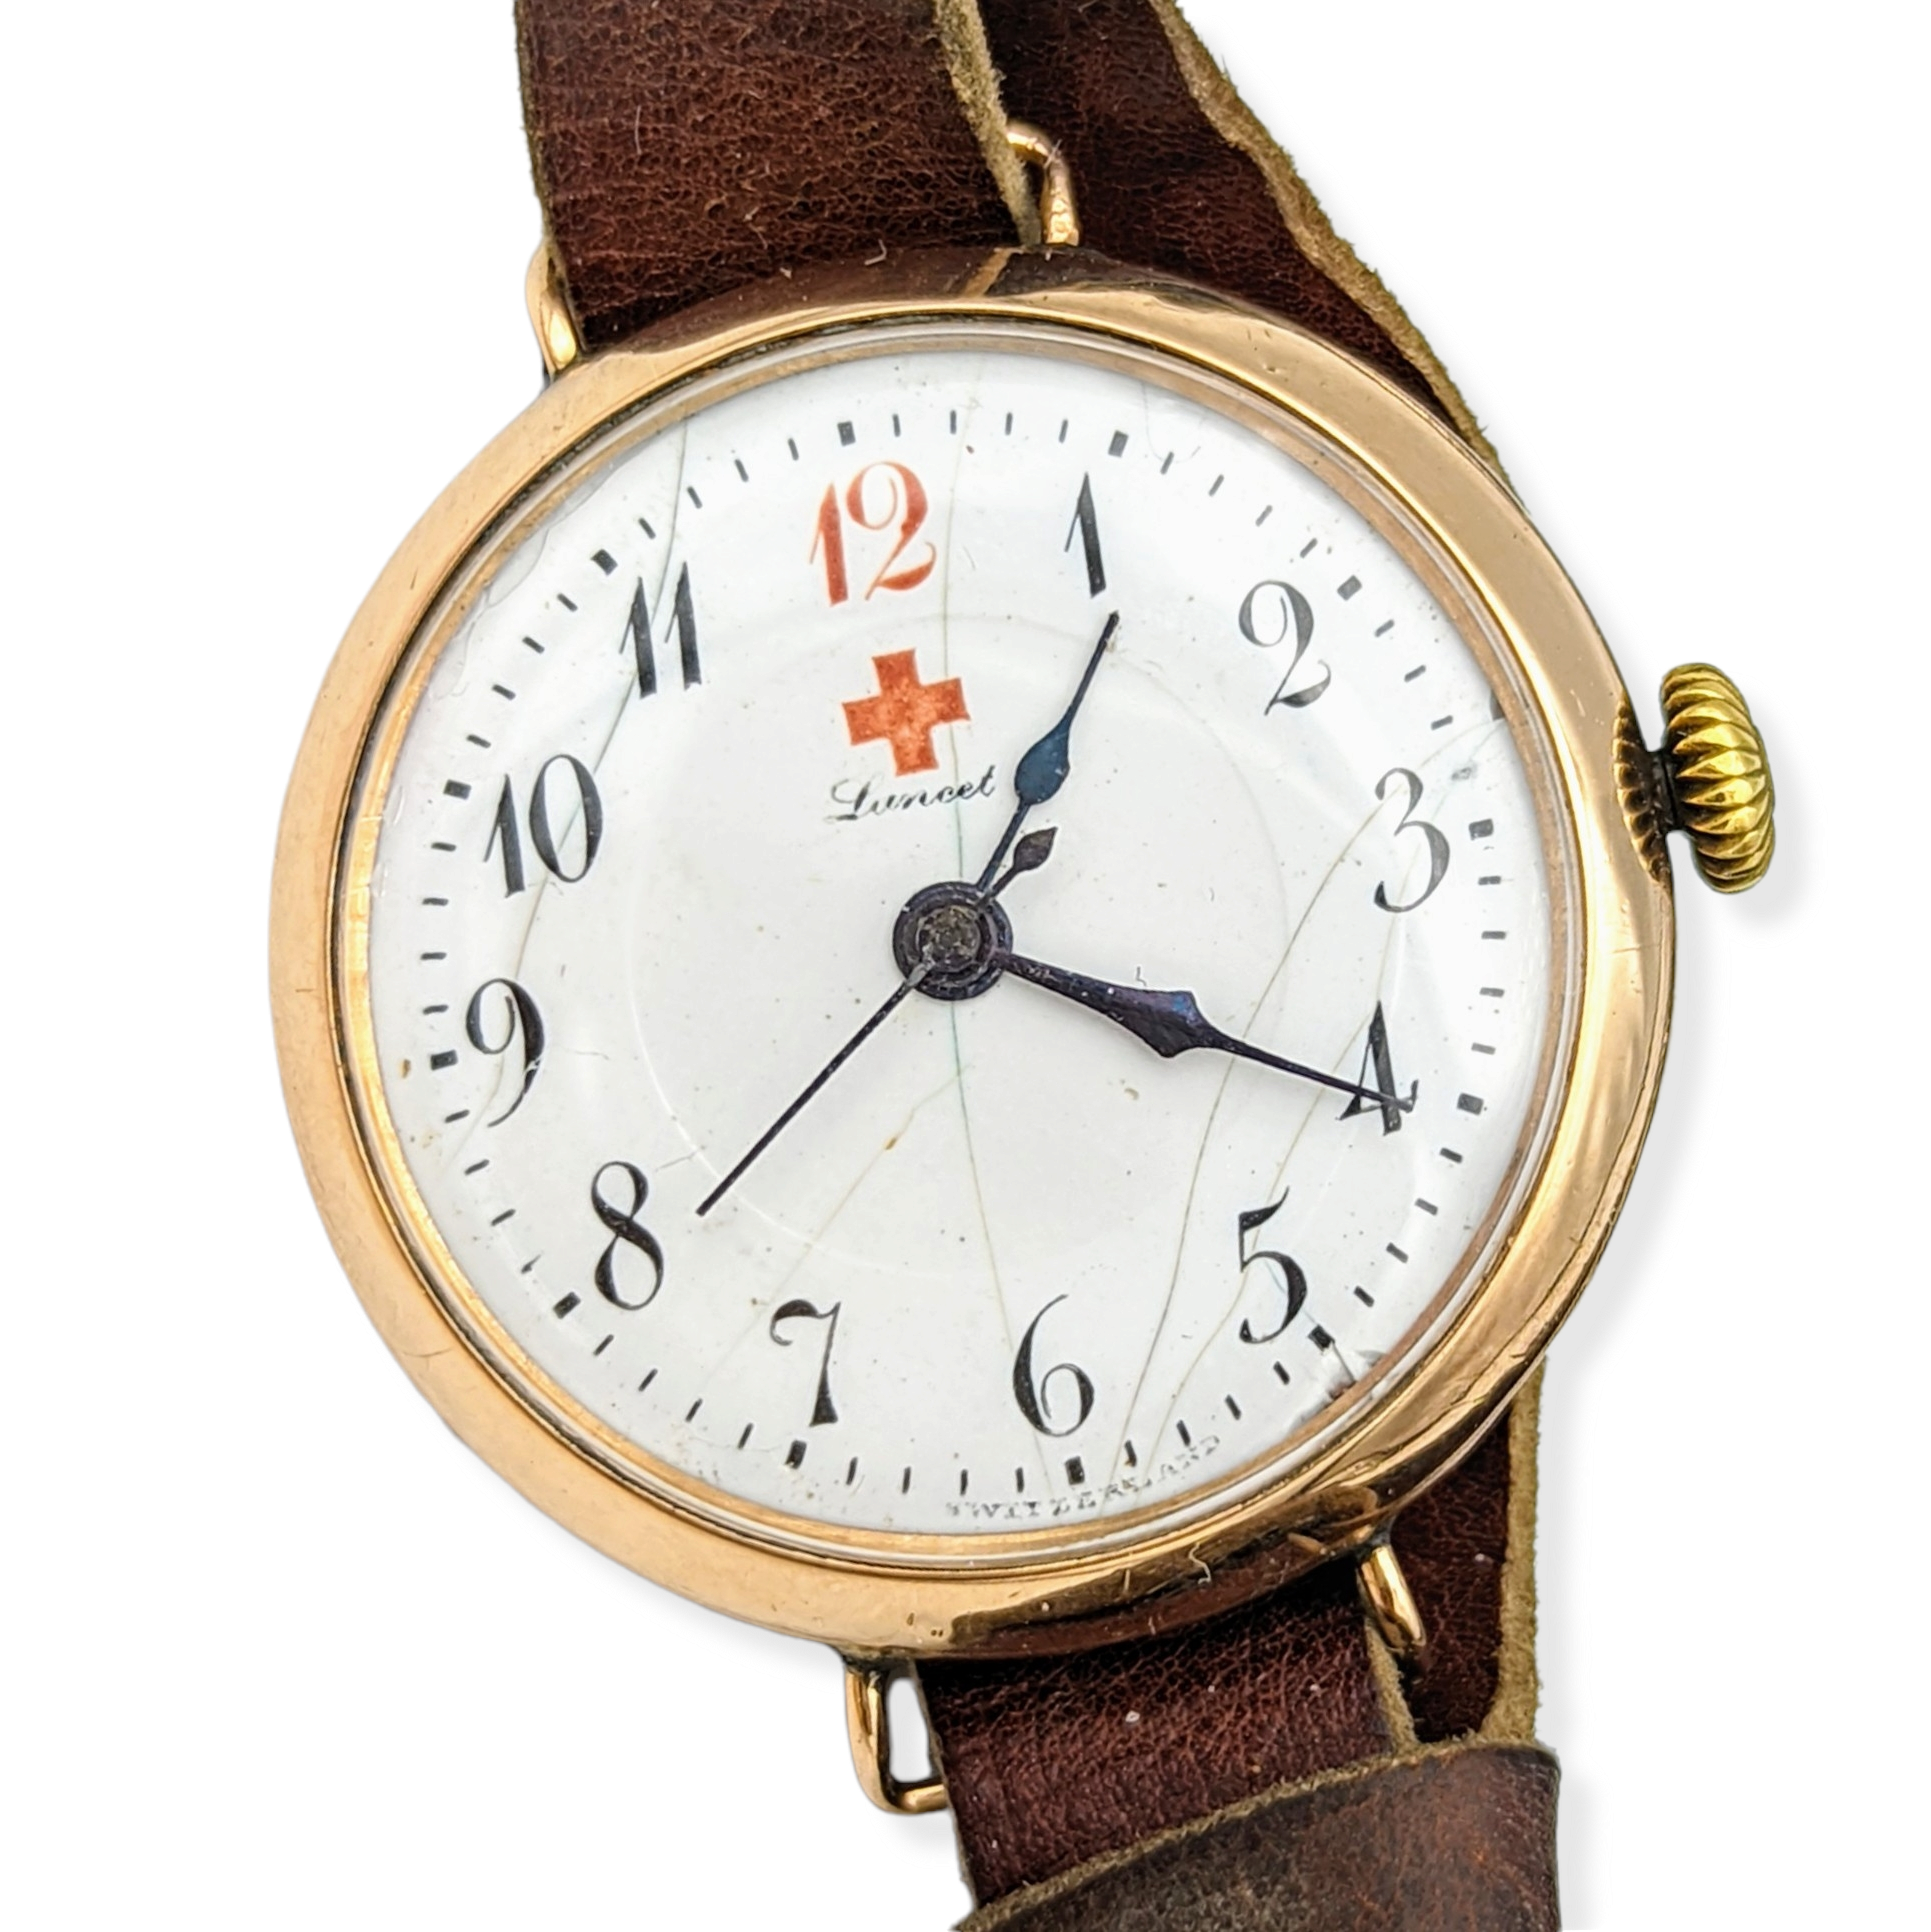 Lancet Red Cross Medical Wristwatch - WWI Trench Watch - Movem – SECOND HOROLOGY